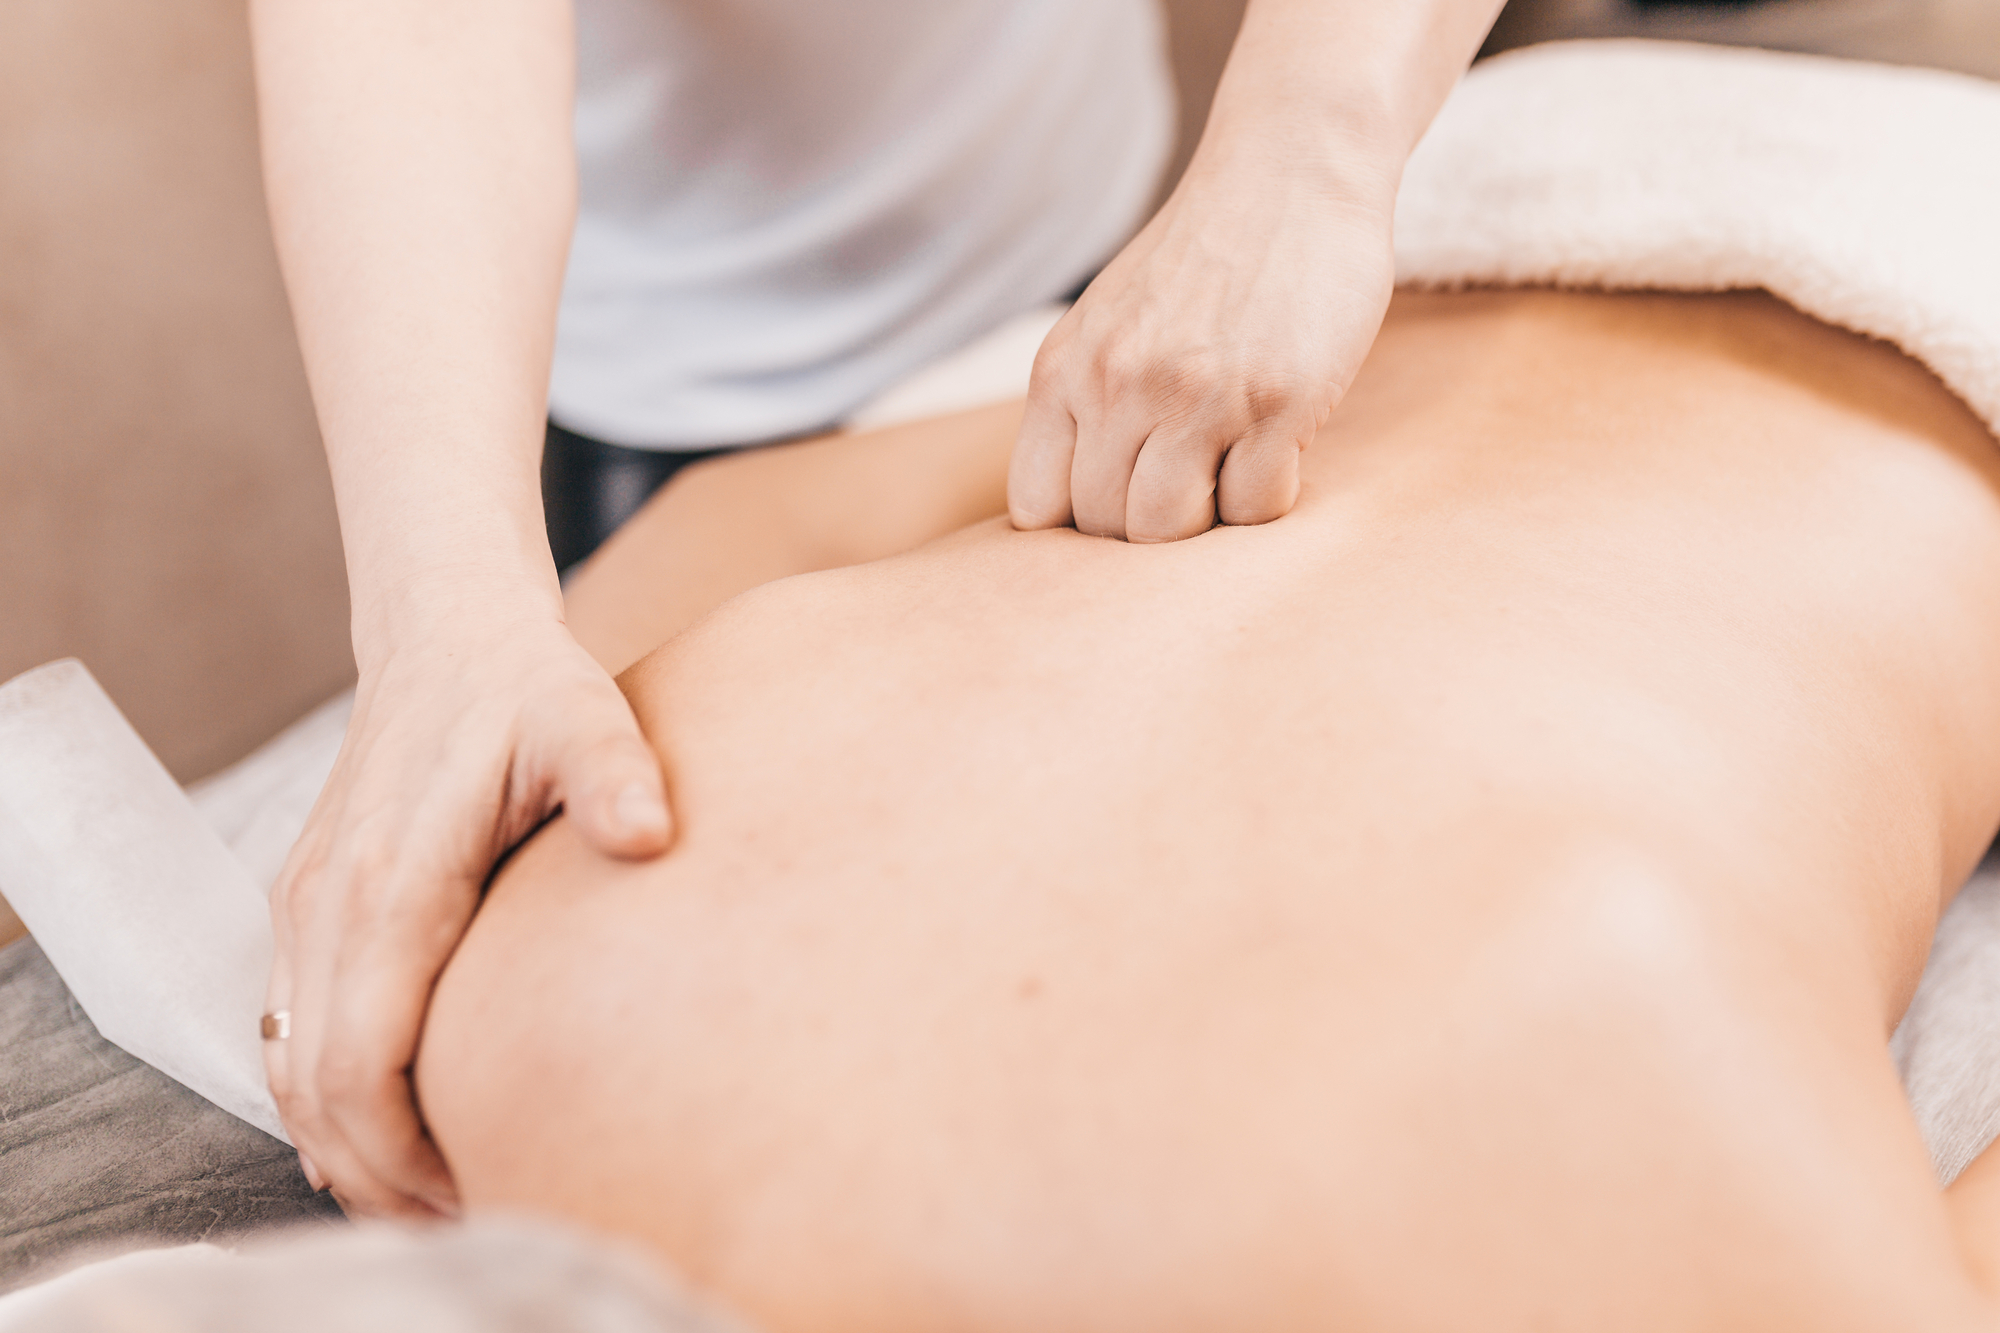 Why are Swedish Massages So Popular?